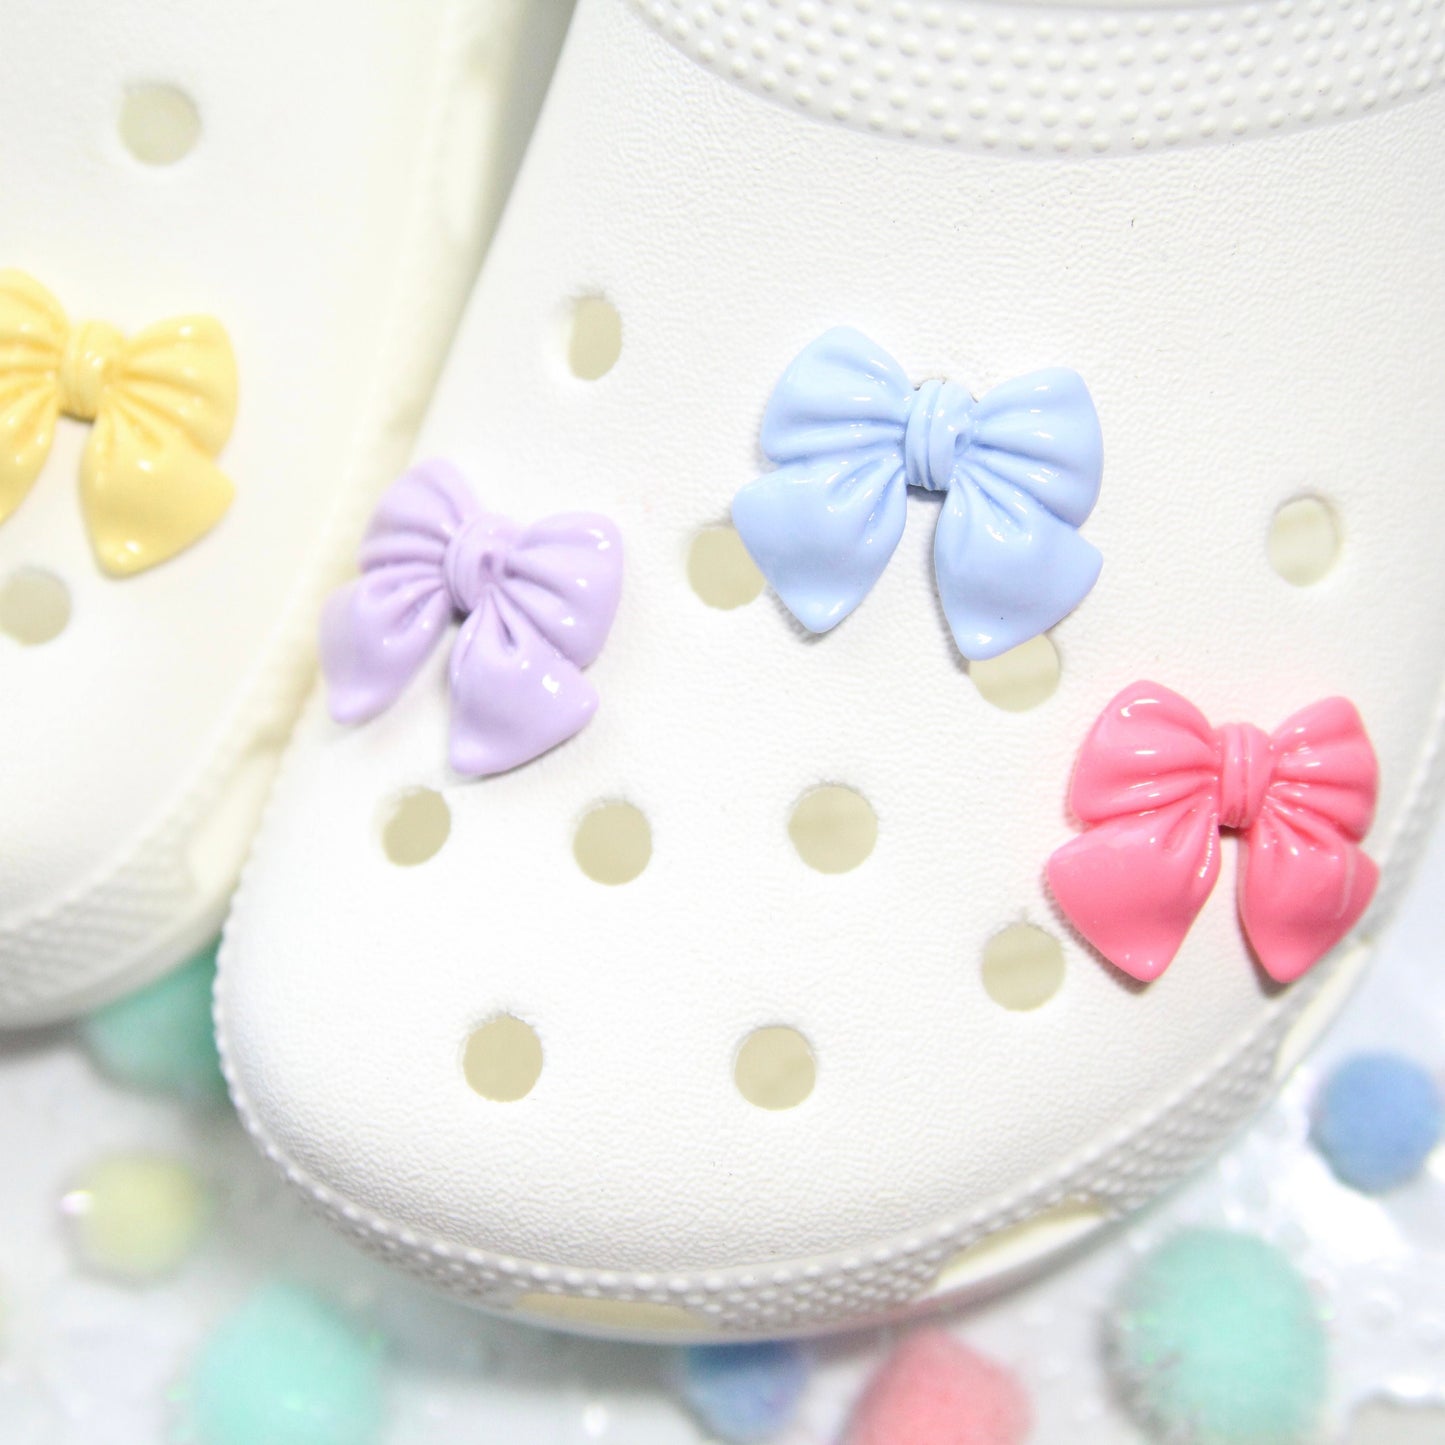 Glossy Bows | cute shoe charms